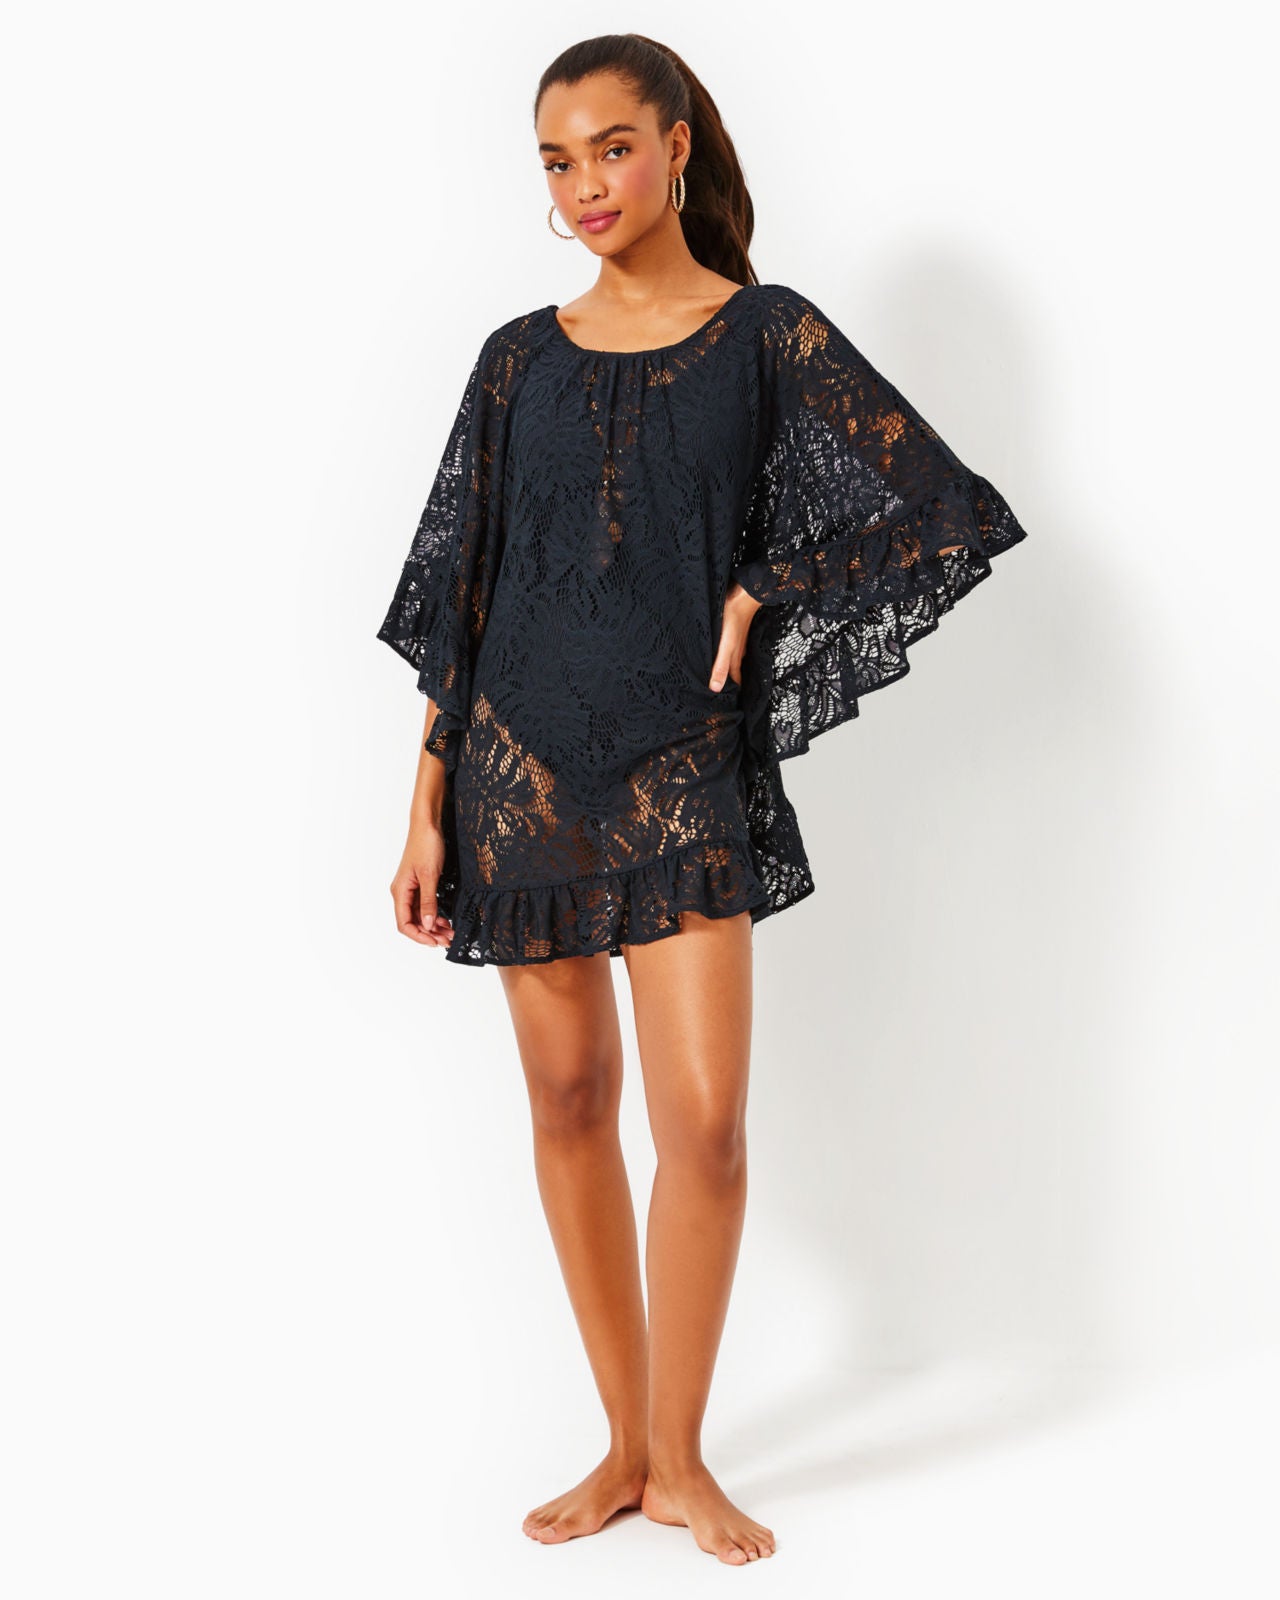 Atley Lace Coverup